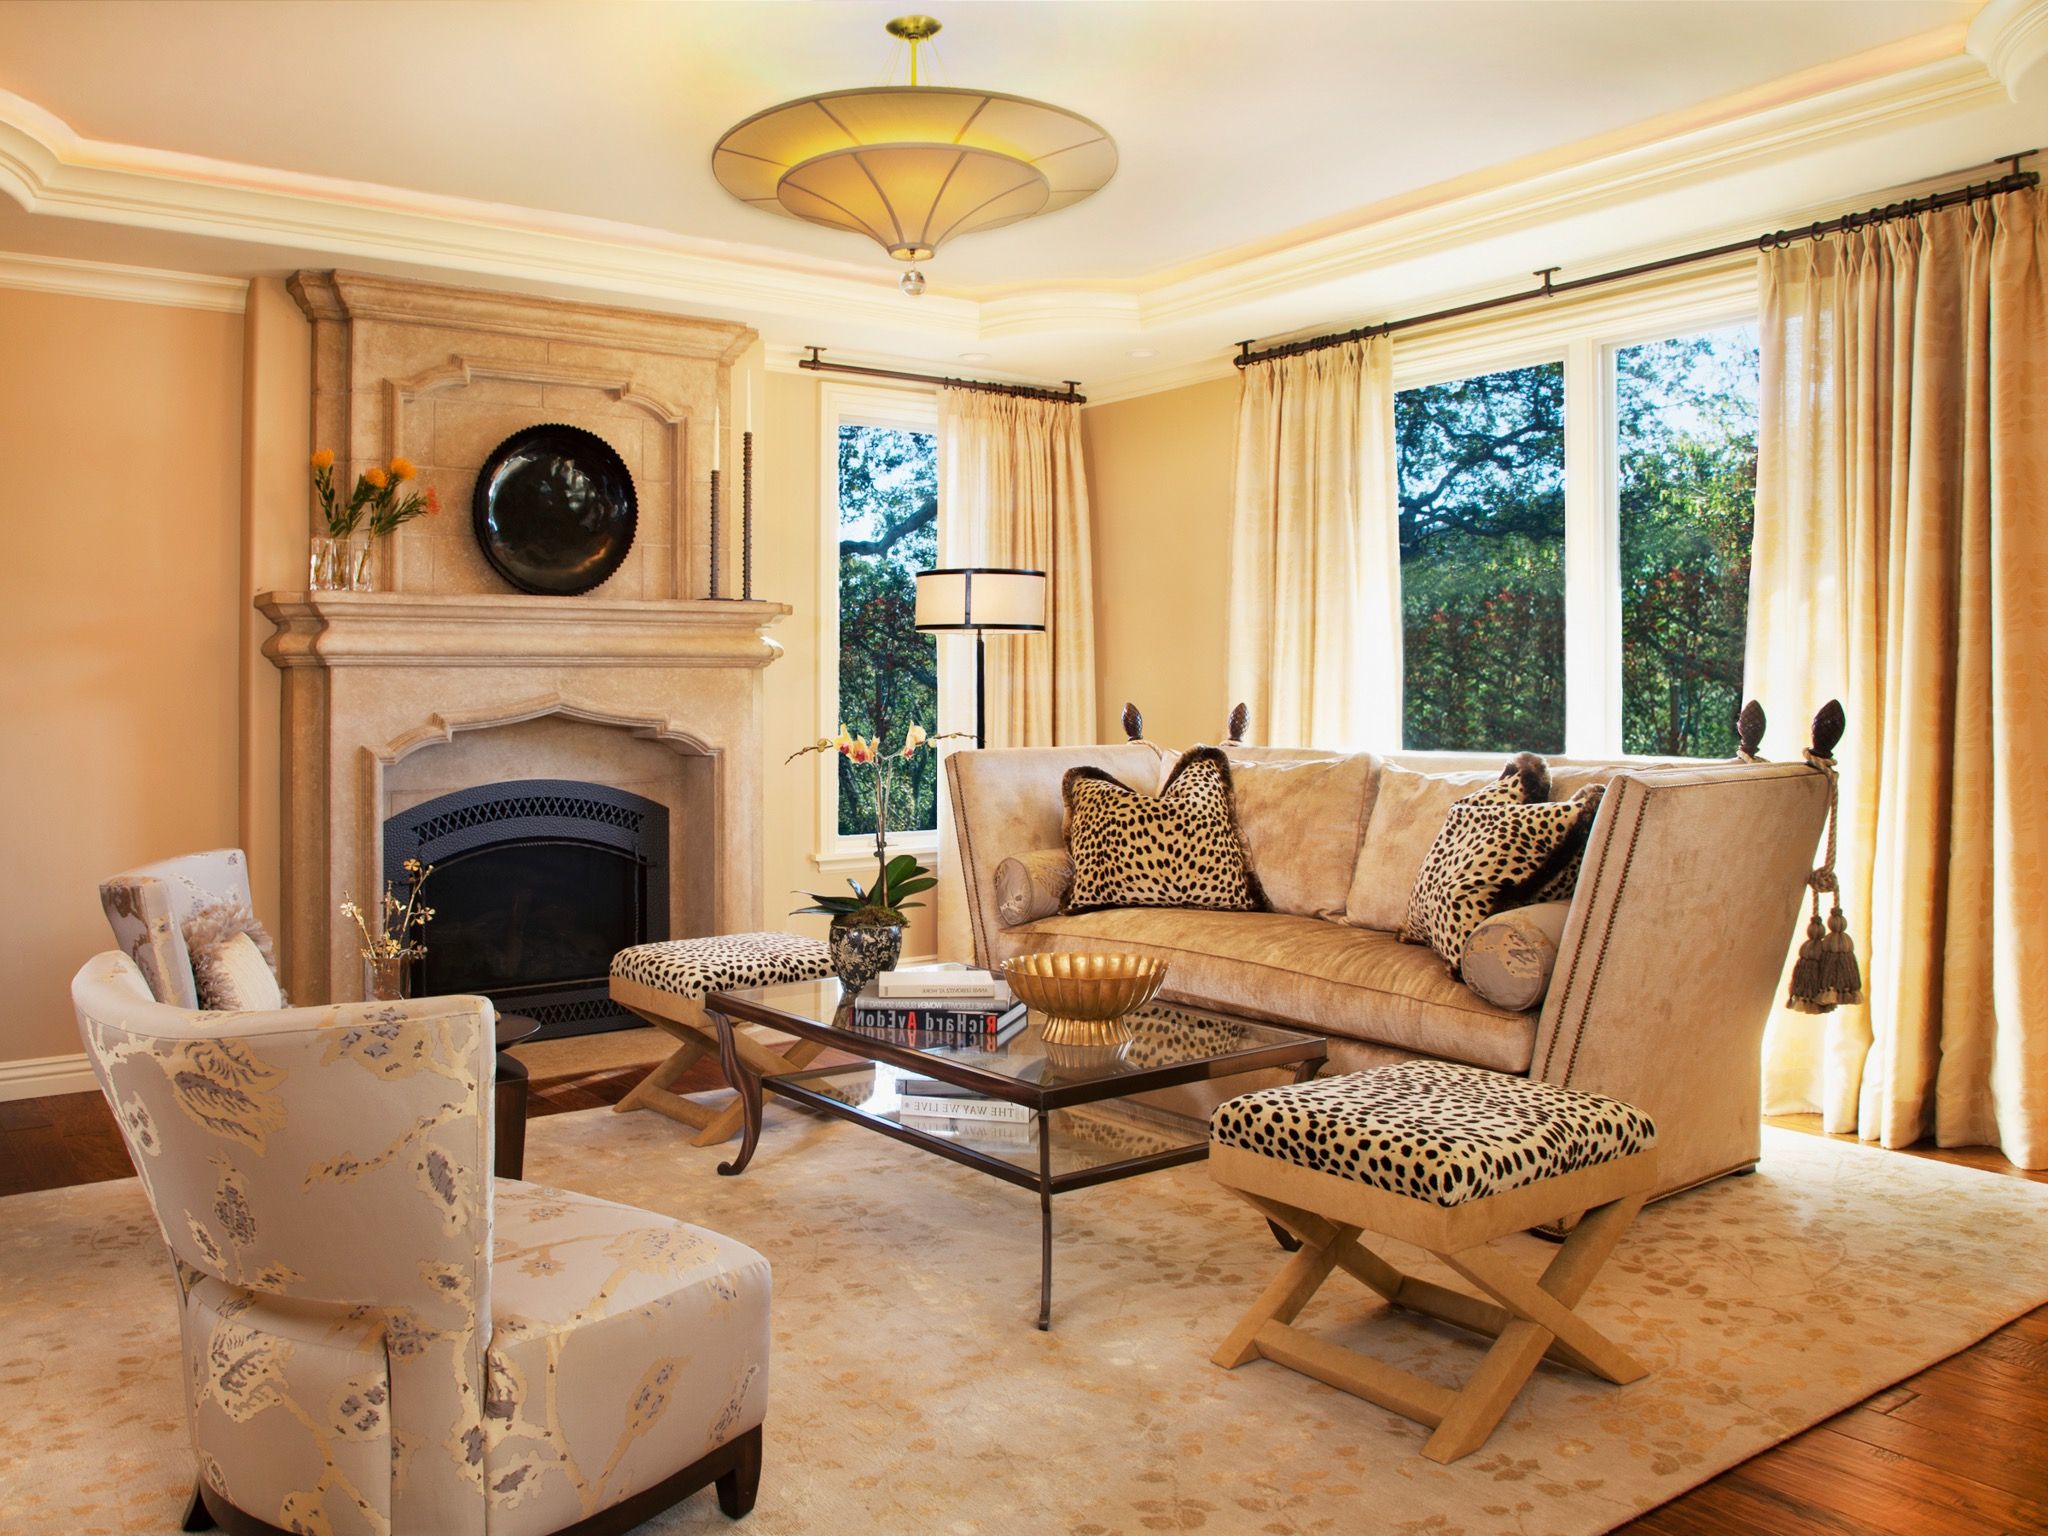 Elegance European Living Room With Classic Furniture Style (View 31 of 33)